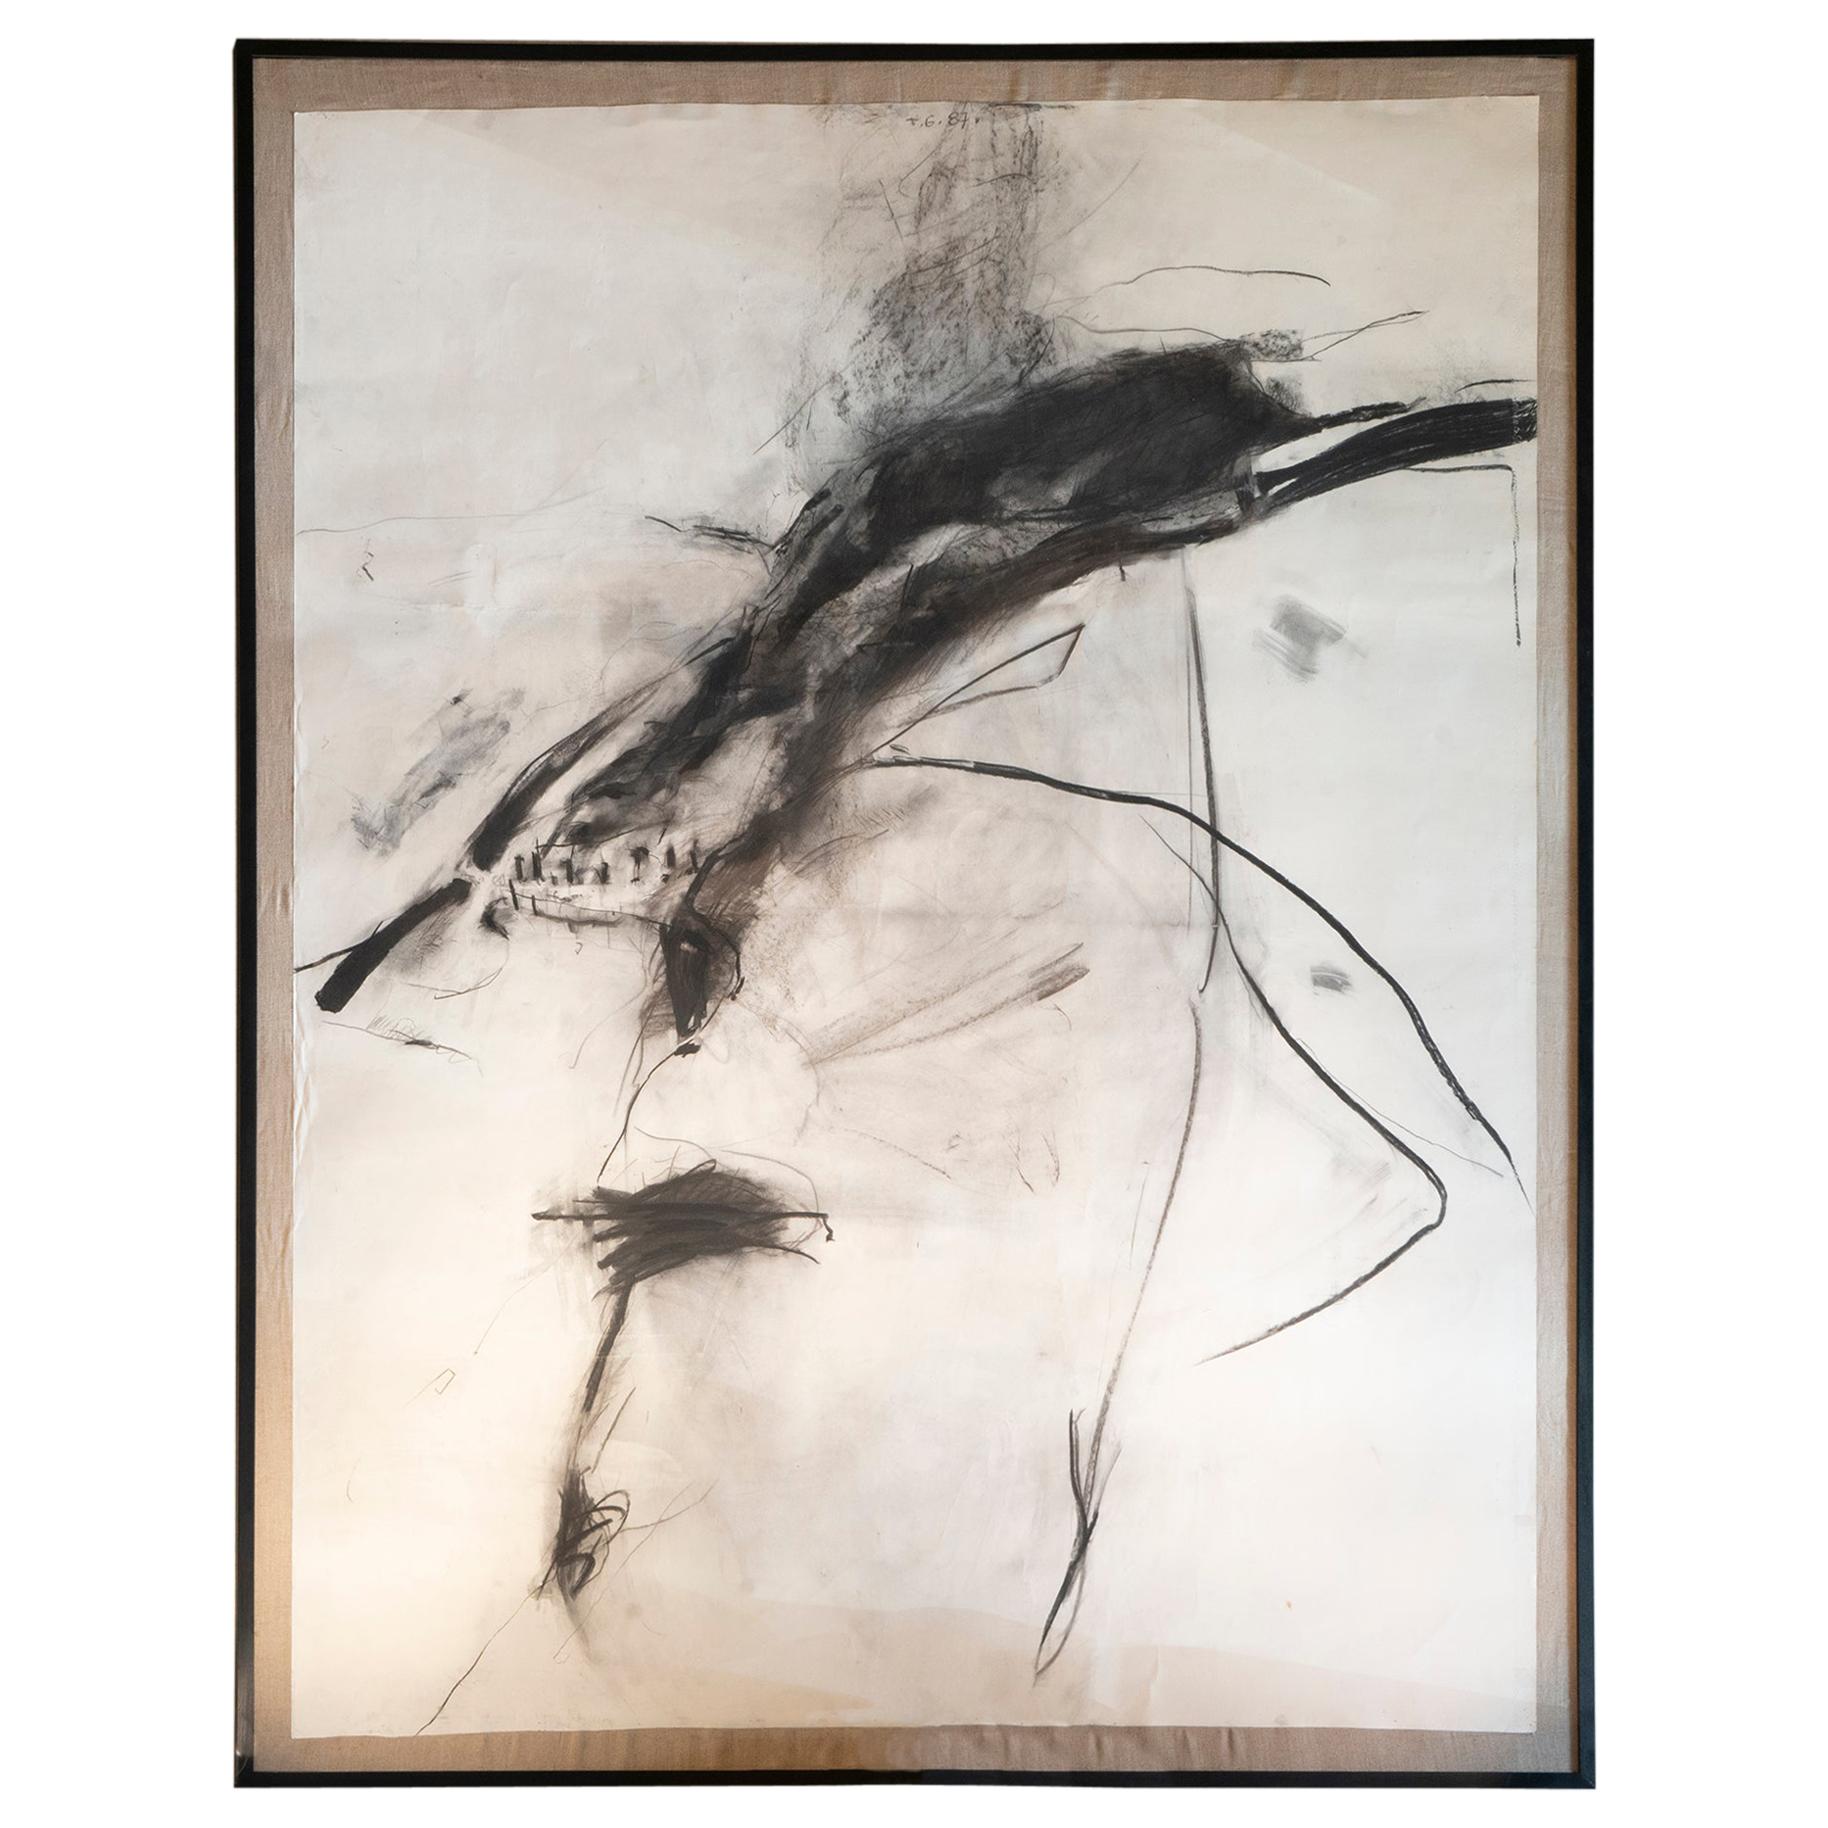 Abstract Charcoal Work on Parchment Paper, Belgium, 1987